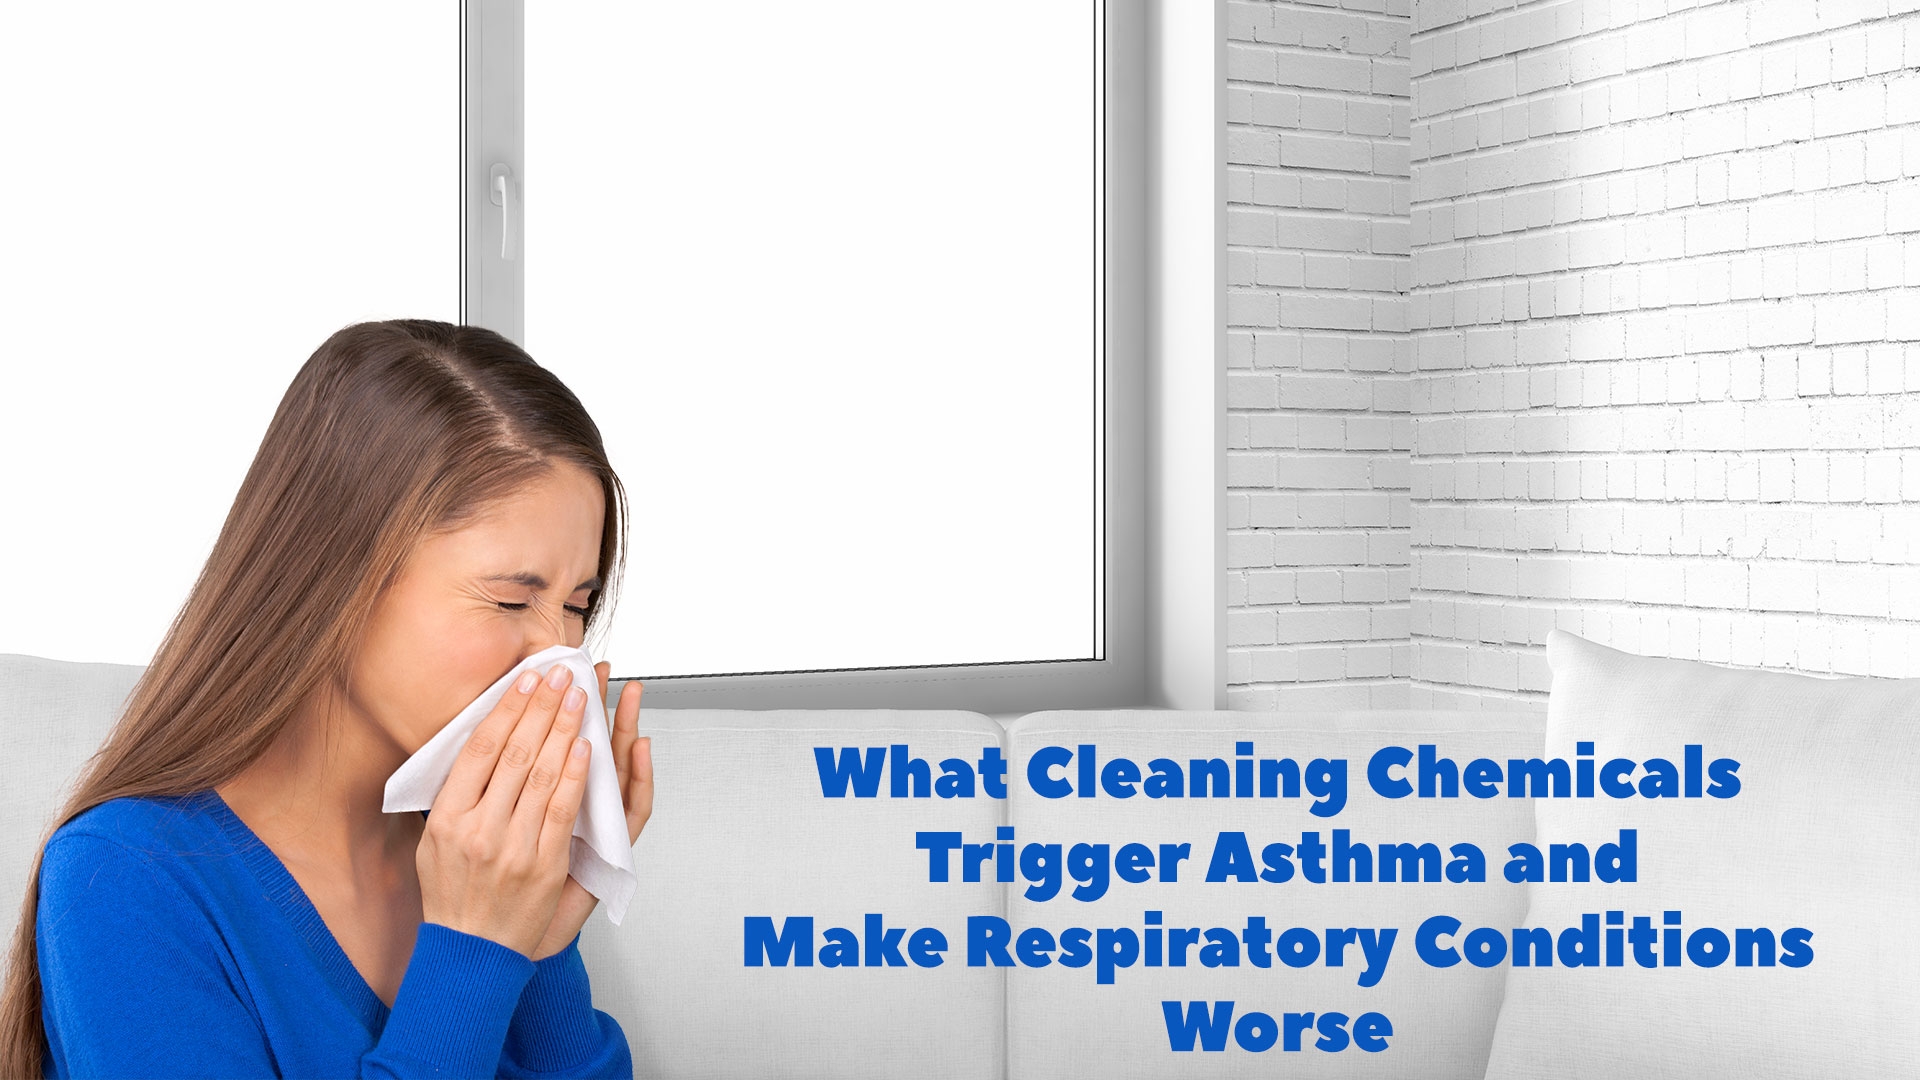 What Cleaning Chemicals Trigger Asthma and Make Respiratory Conditions Worse – read here!